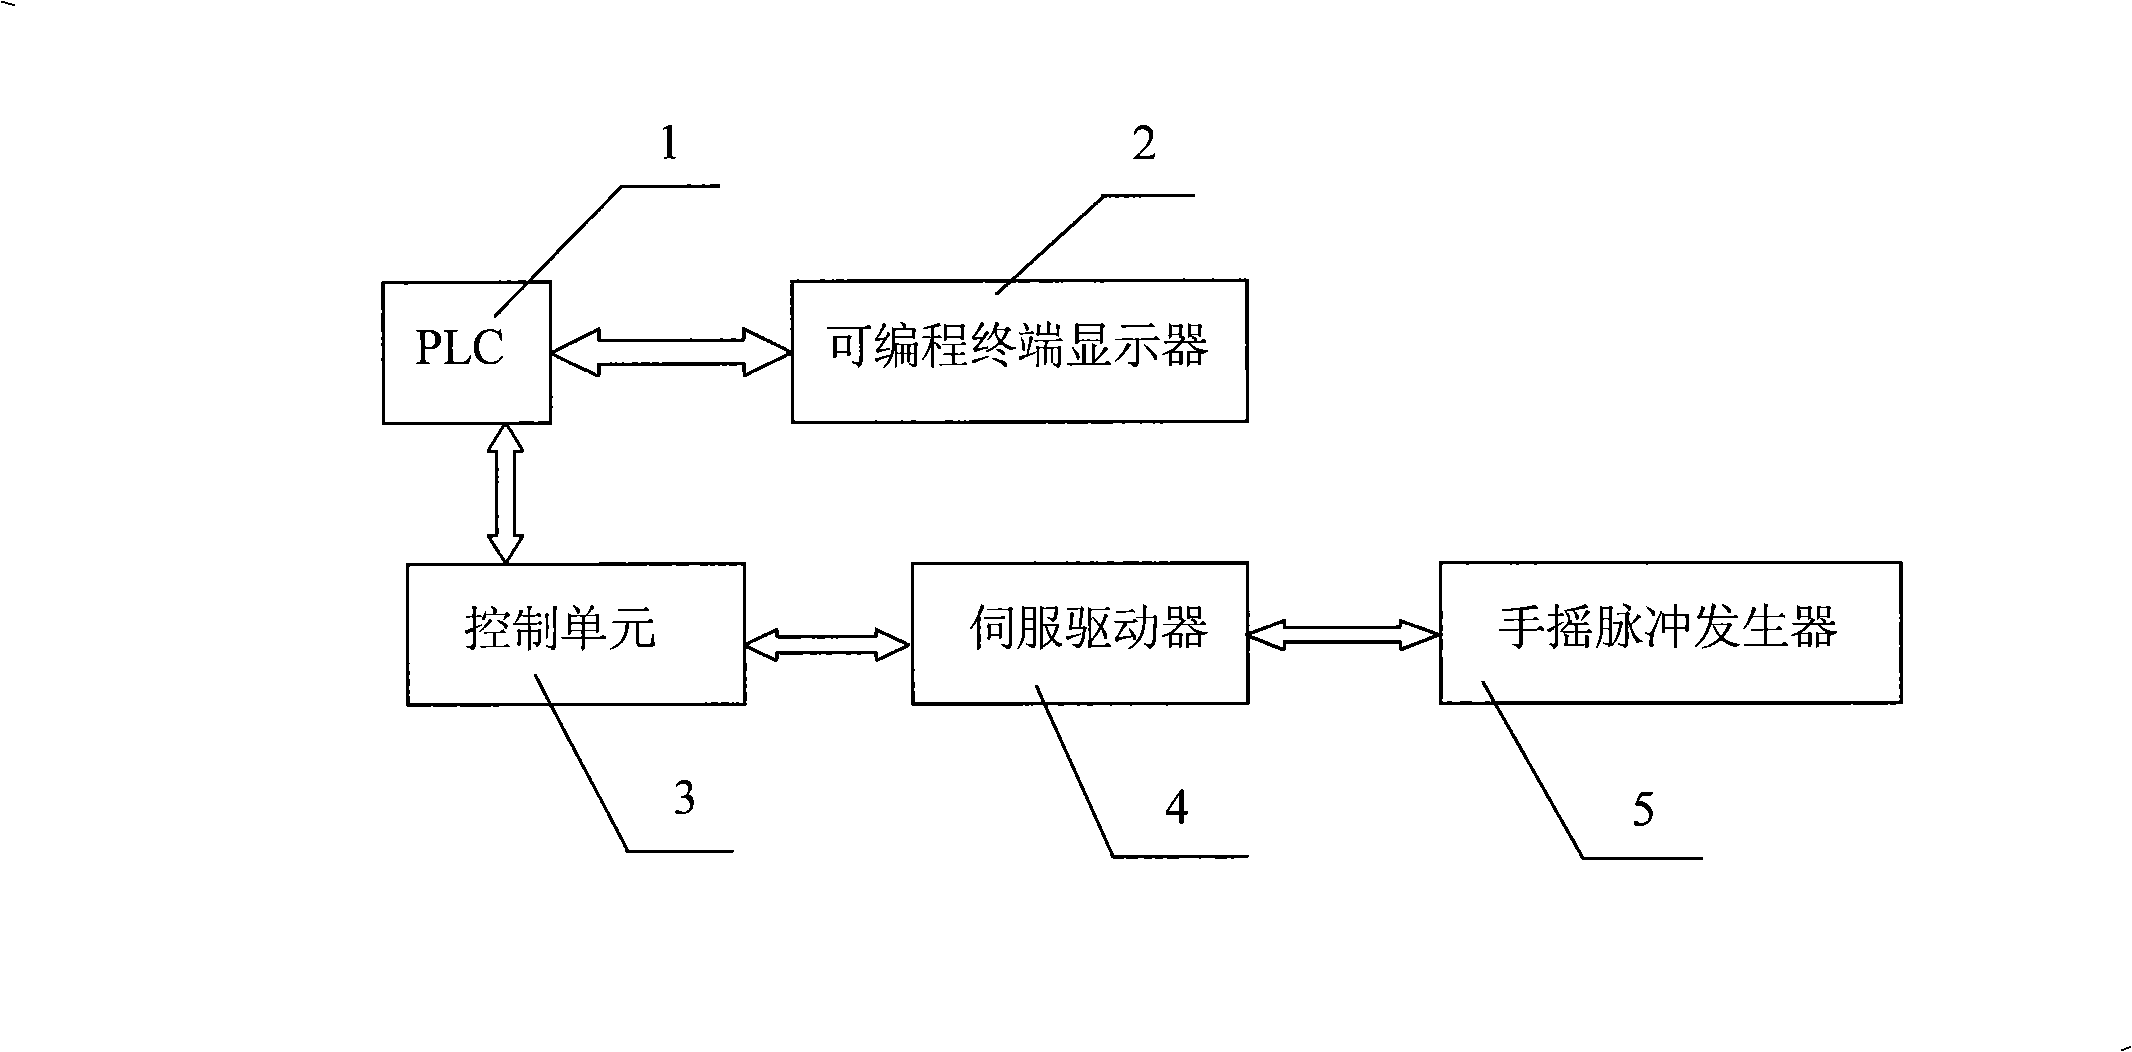 Control method for common roll grinding machine